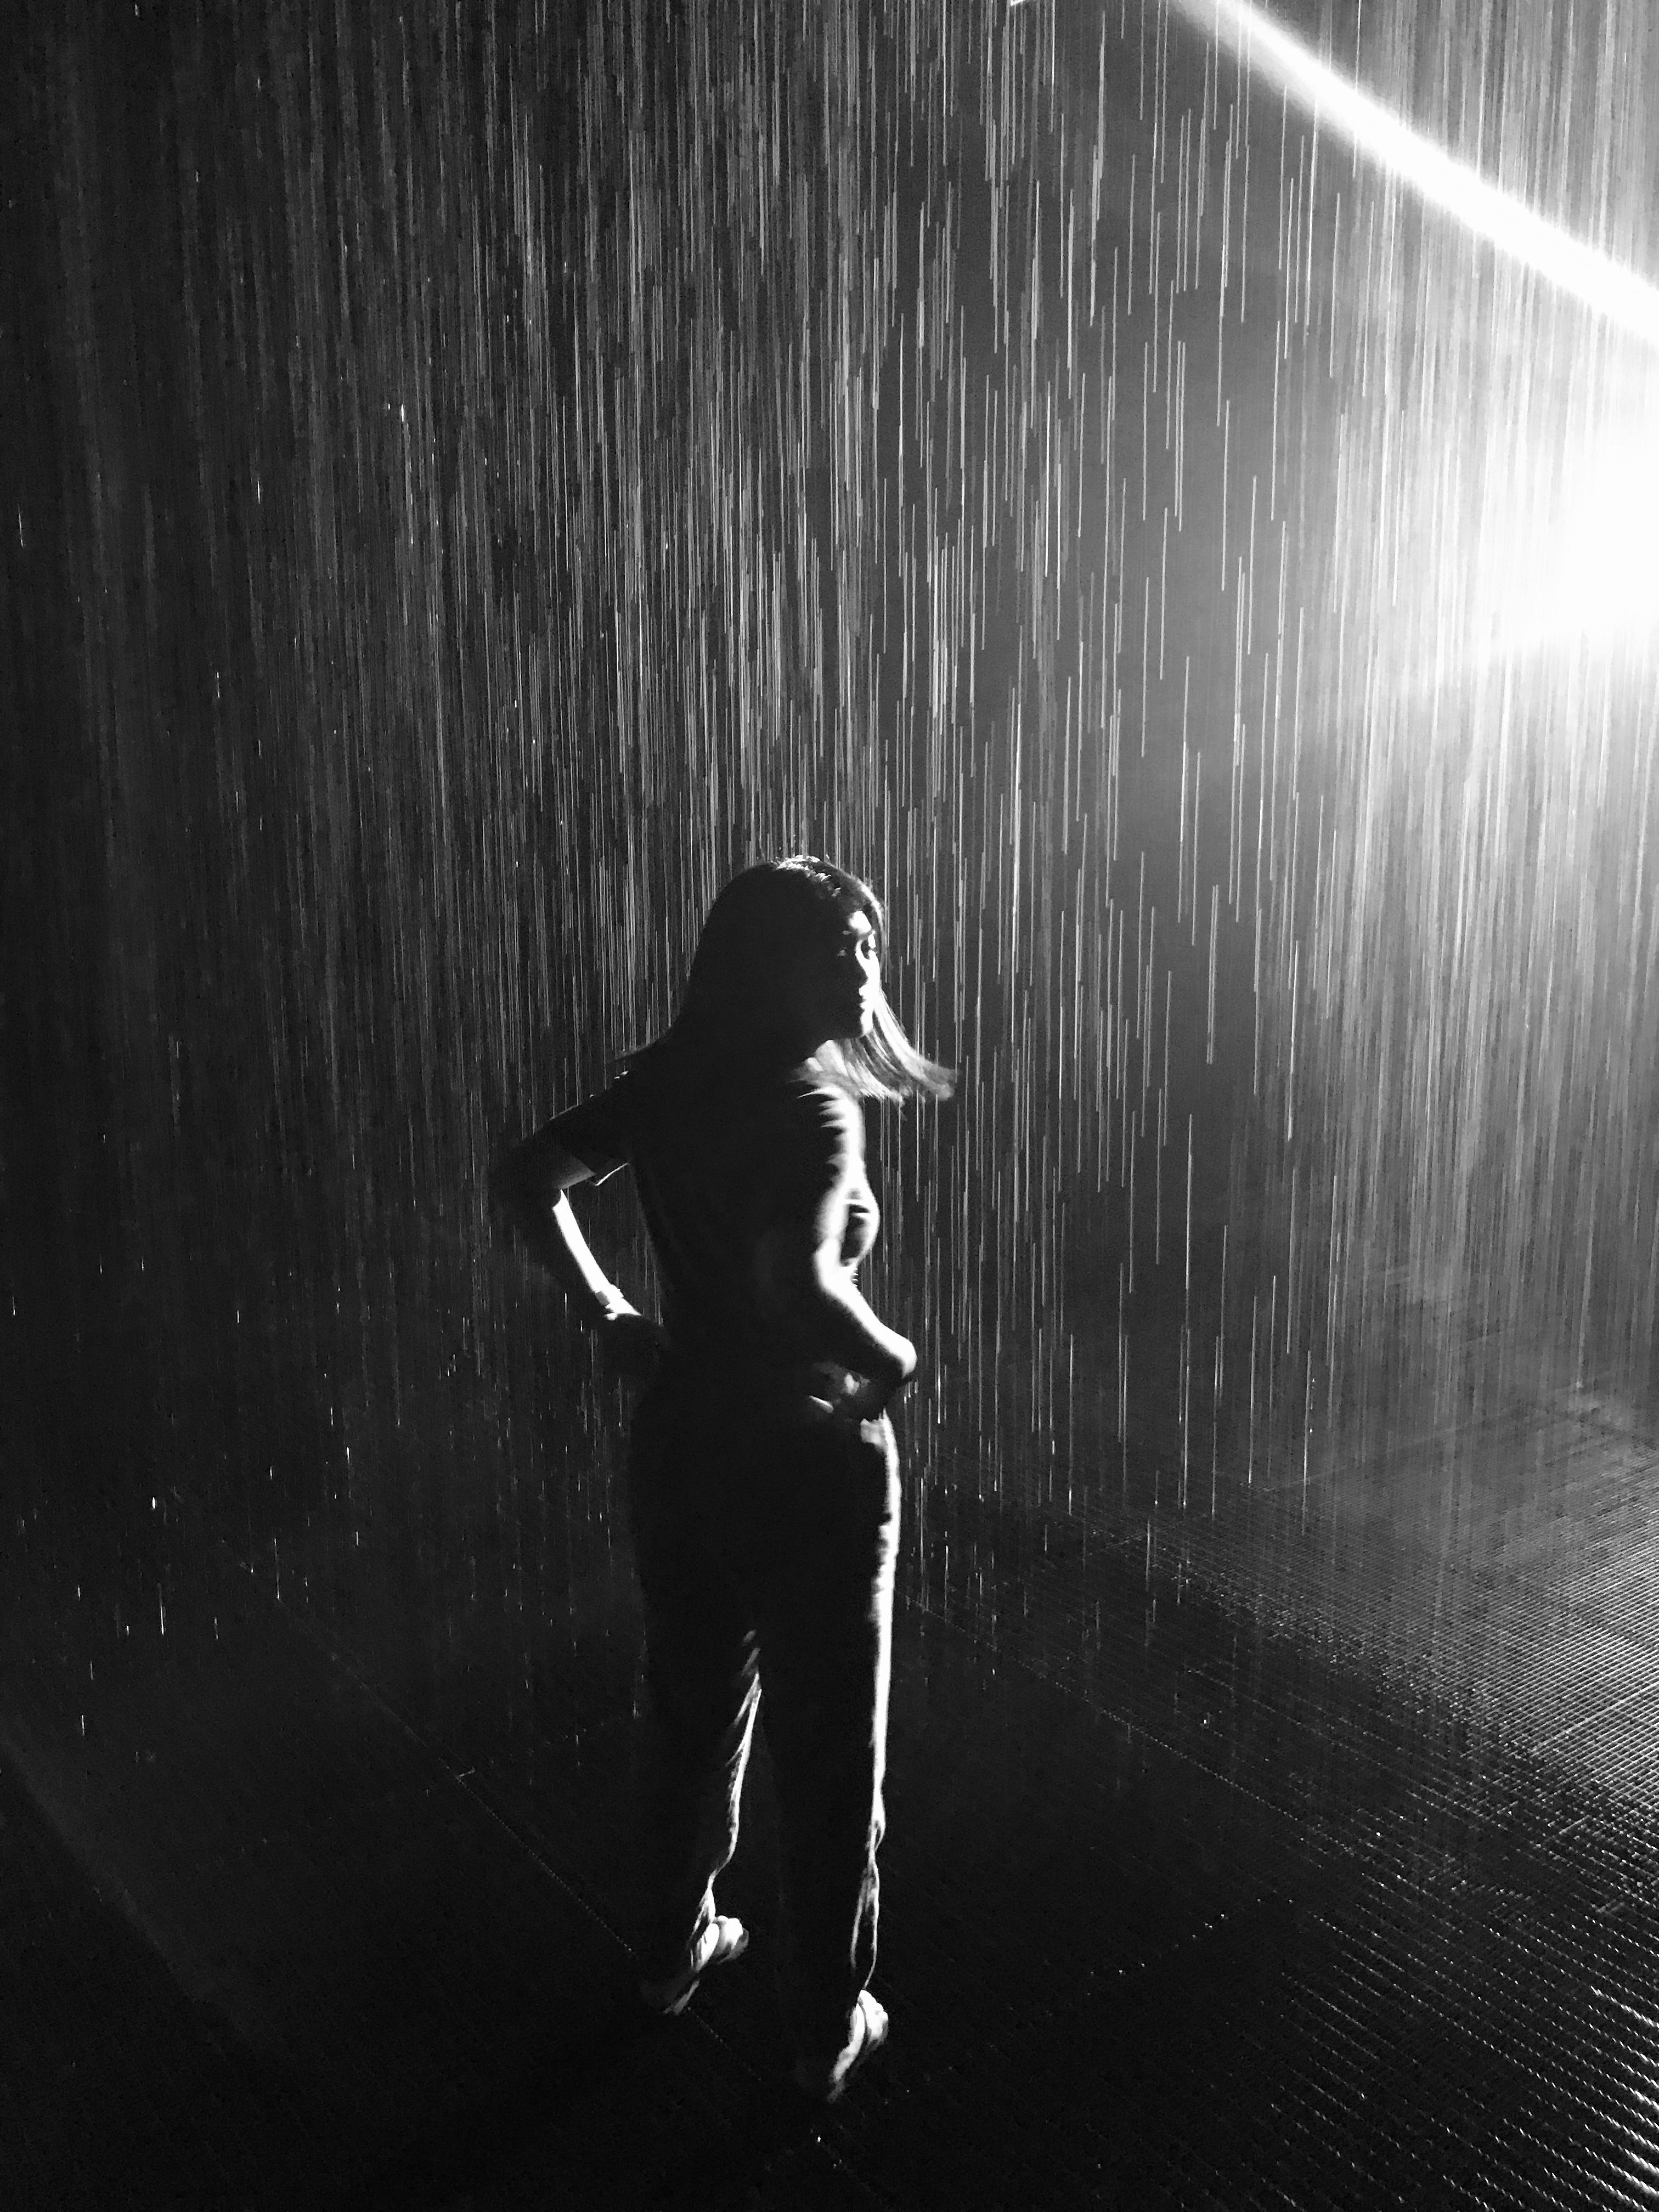 Silhouetted in the rain